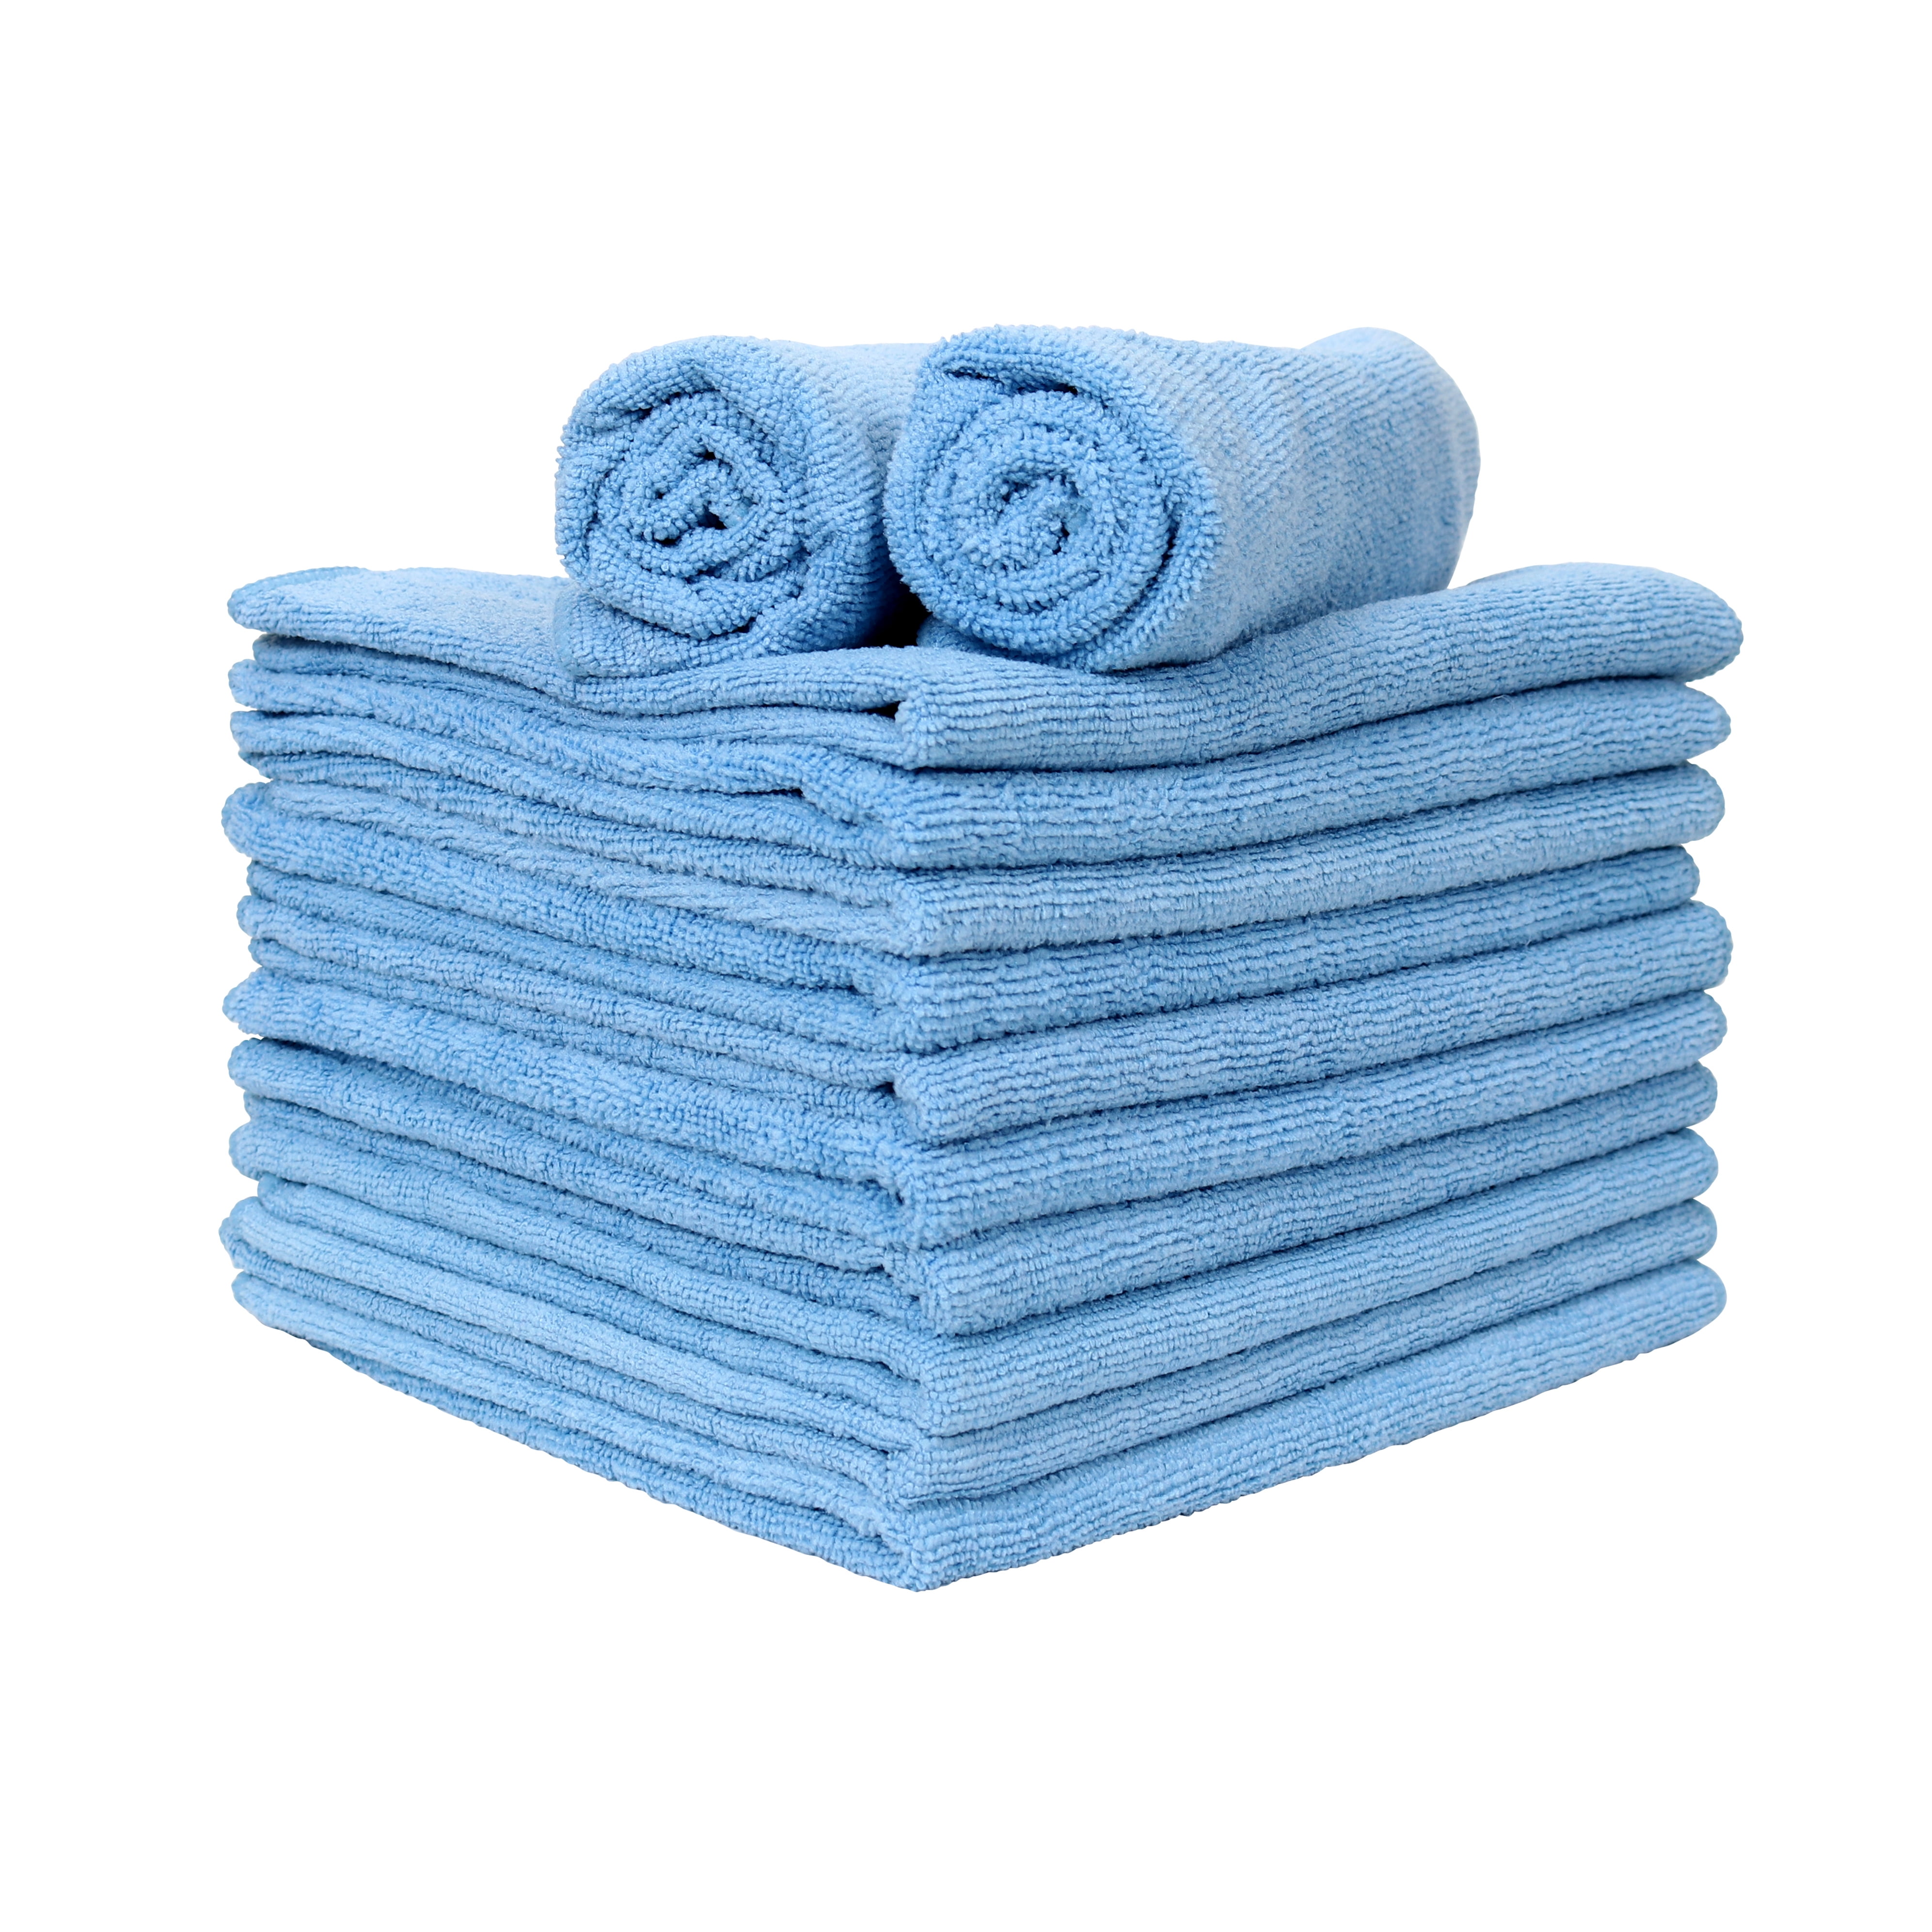 100% Cotton Hand Towels for Face Care Bathroom kitchen,Sports Non-disposable 